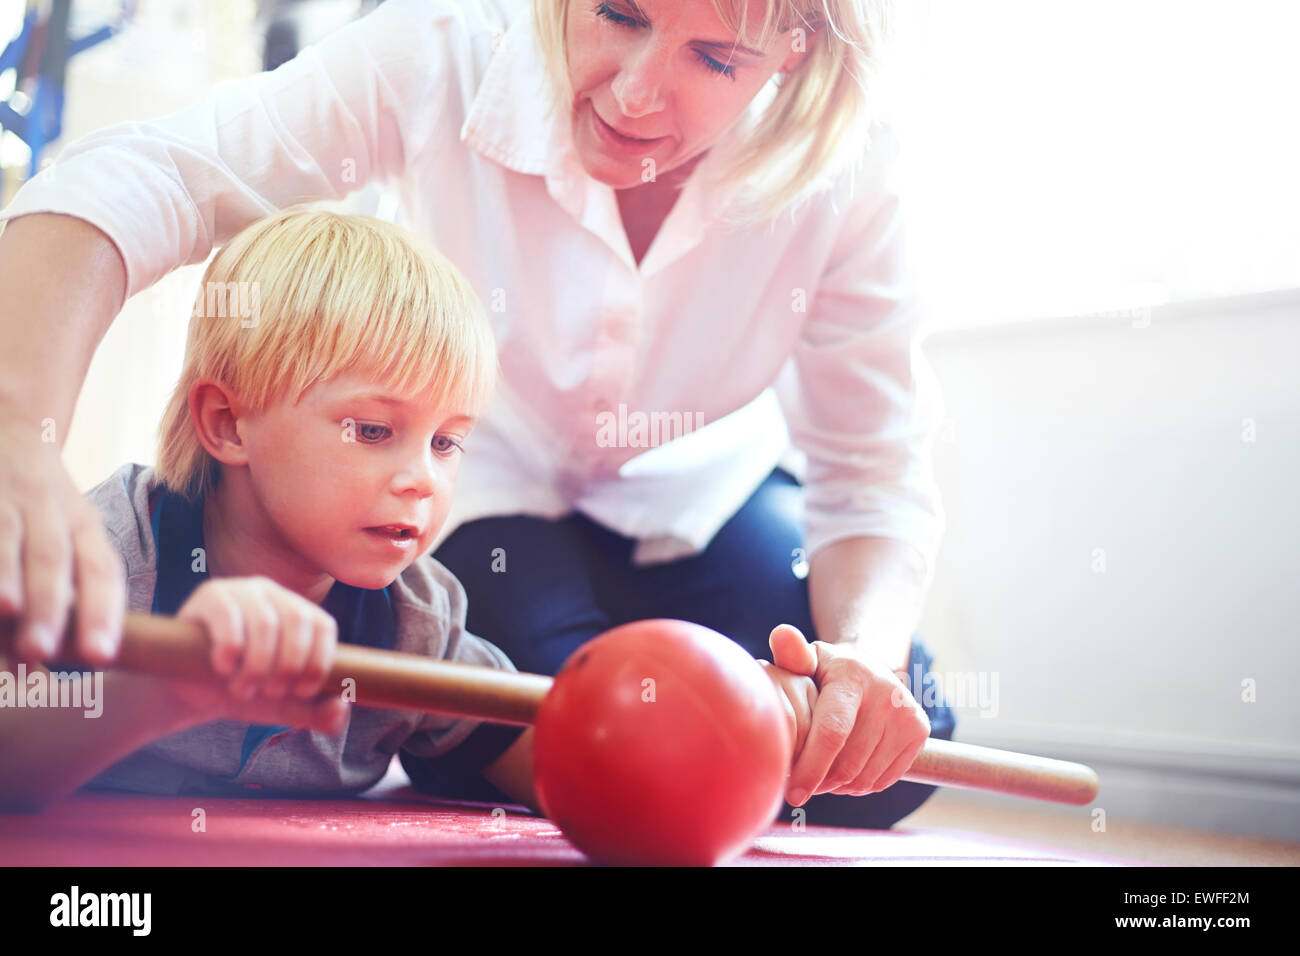 Physical therapist guiding boy rolling ball with stick Stock Photo